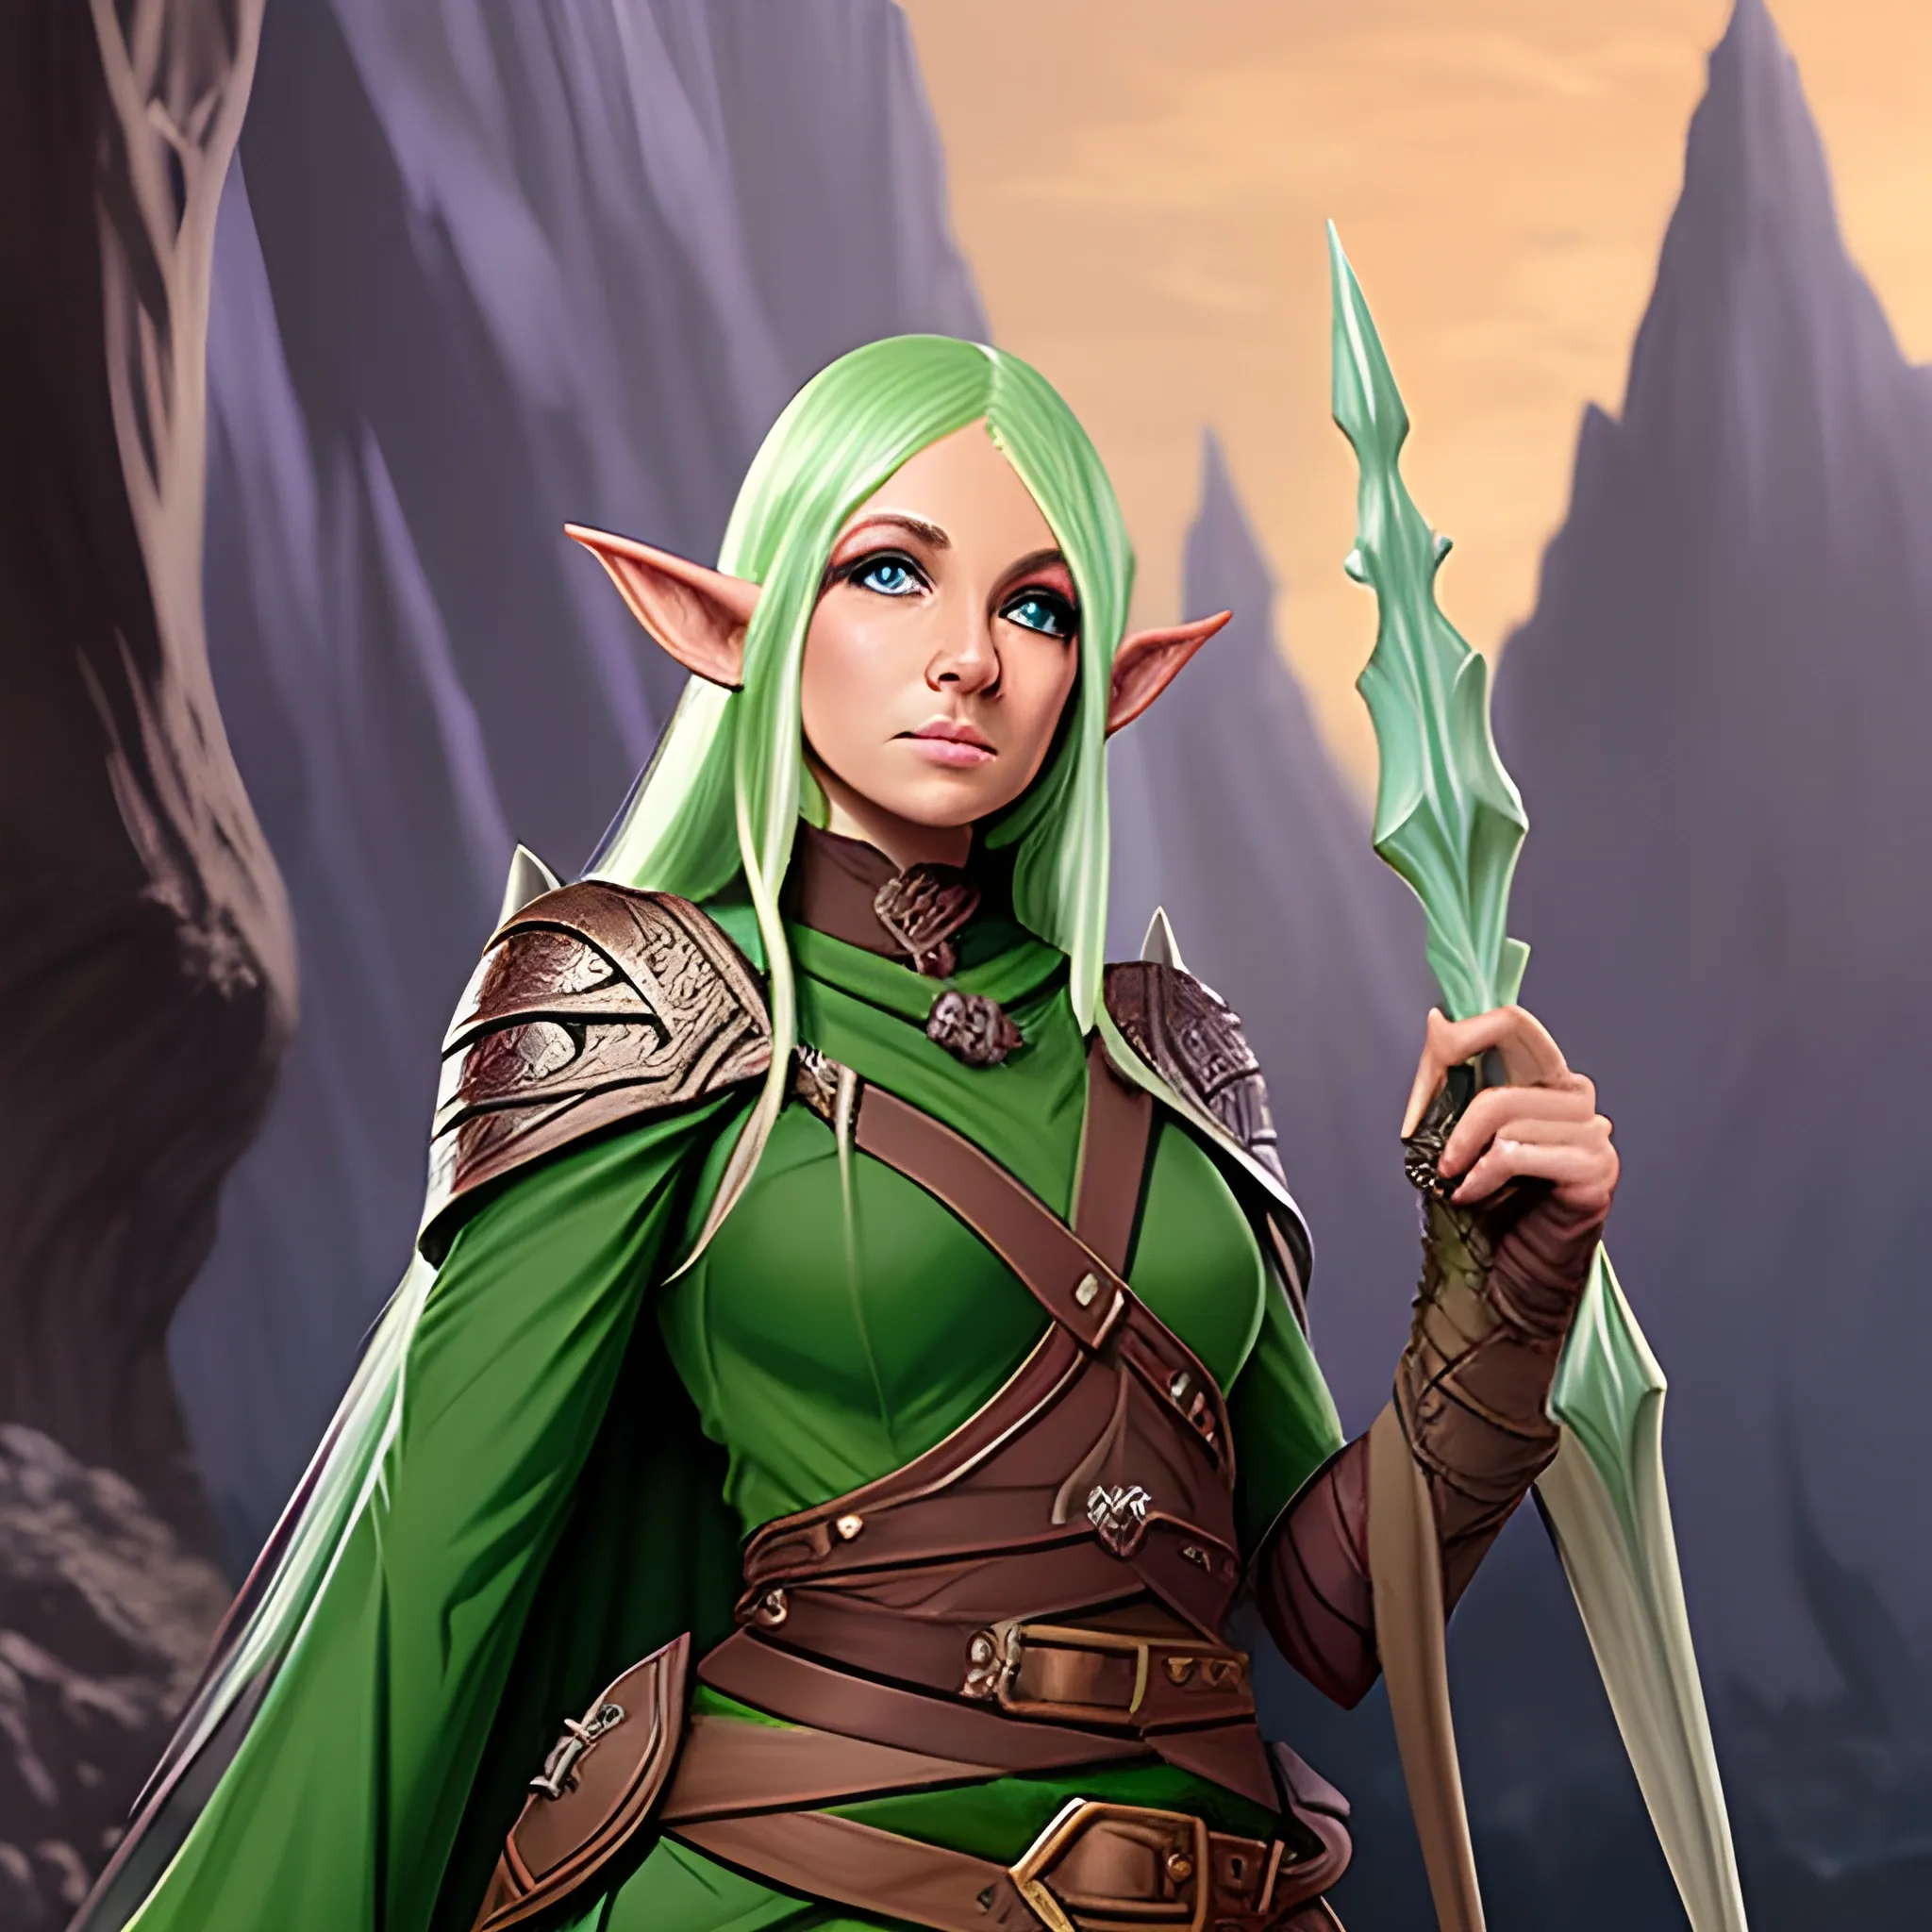 Create a dungeons and dragons character which is an Eladrin Elf female